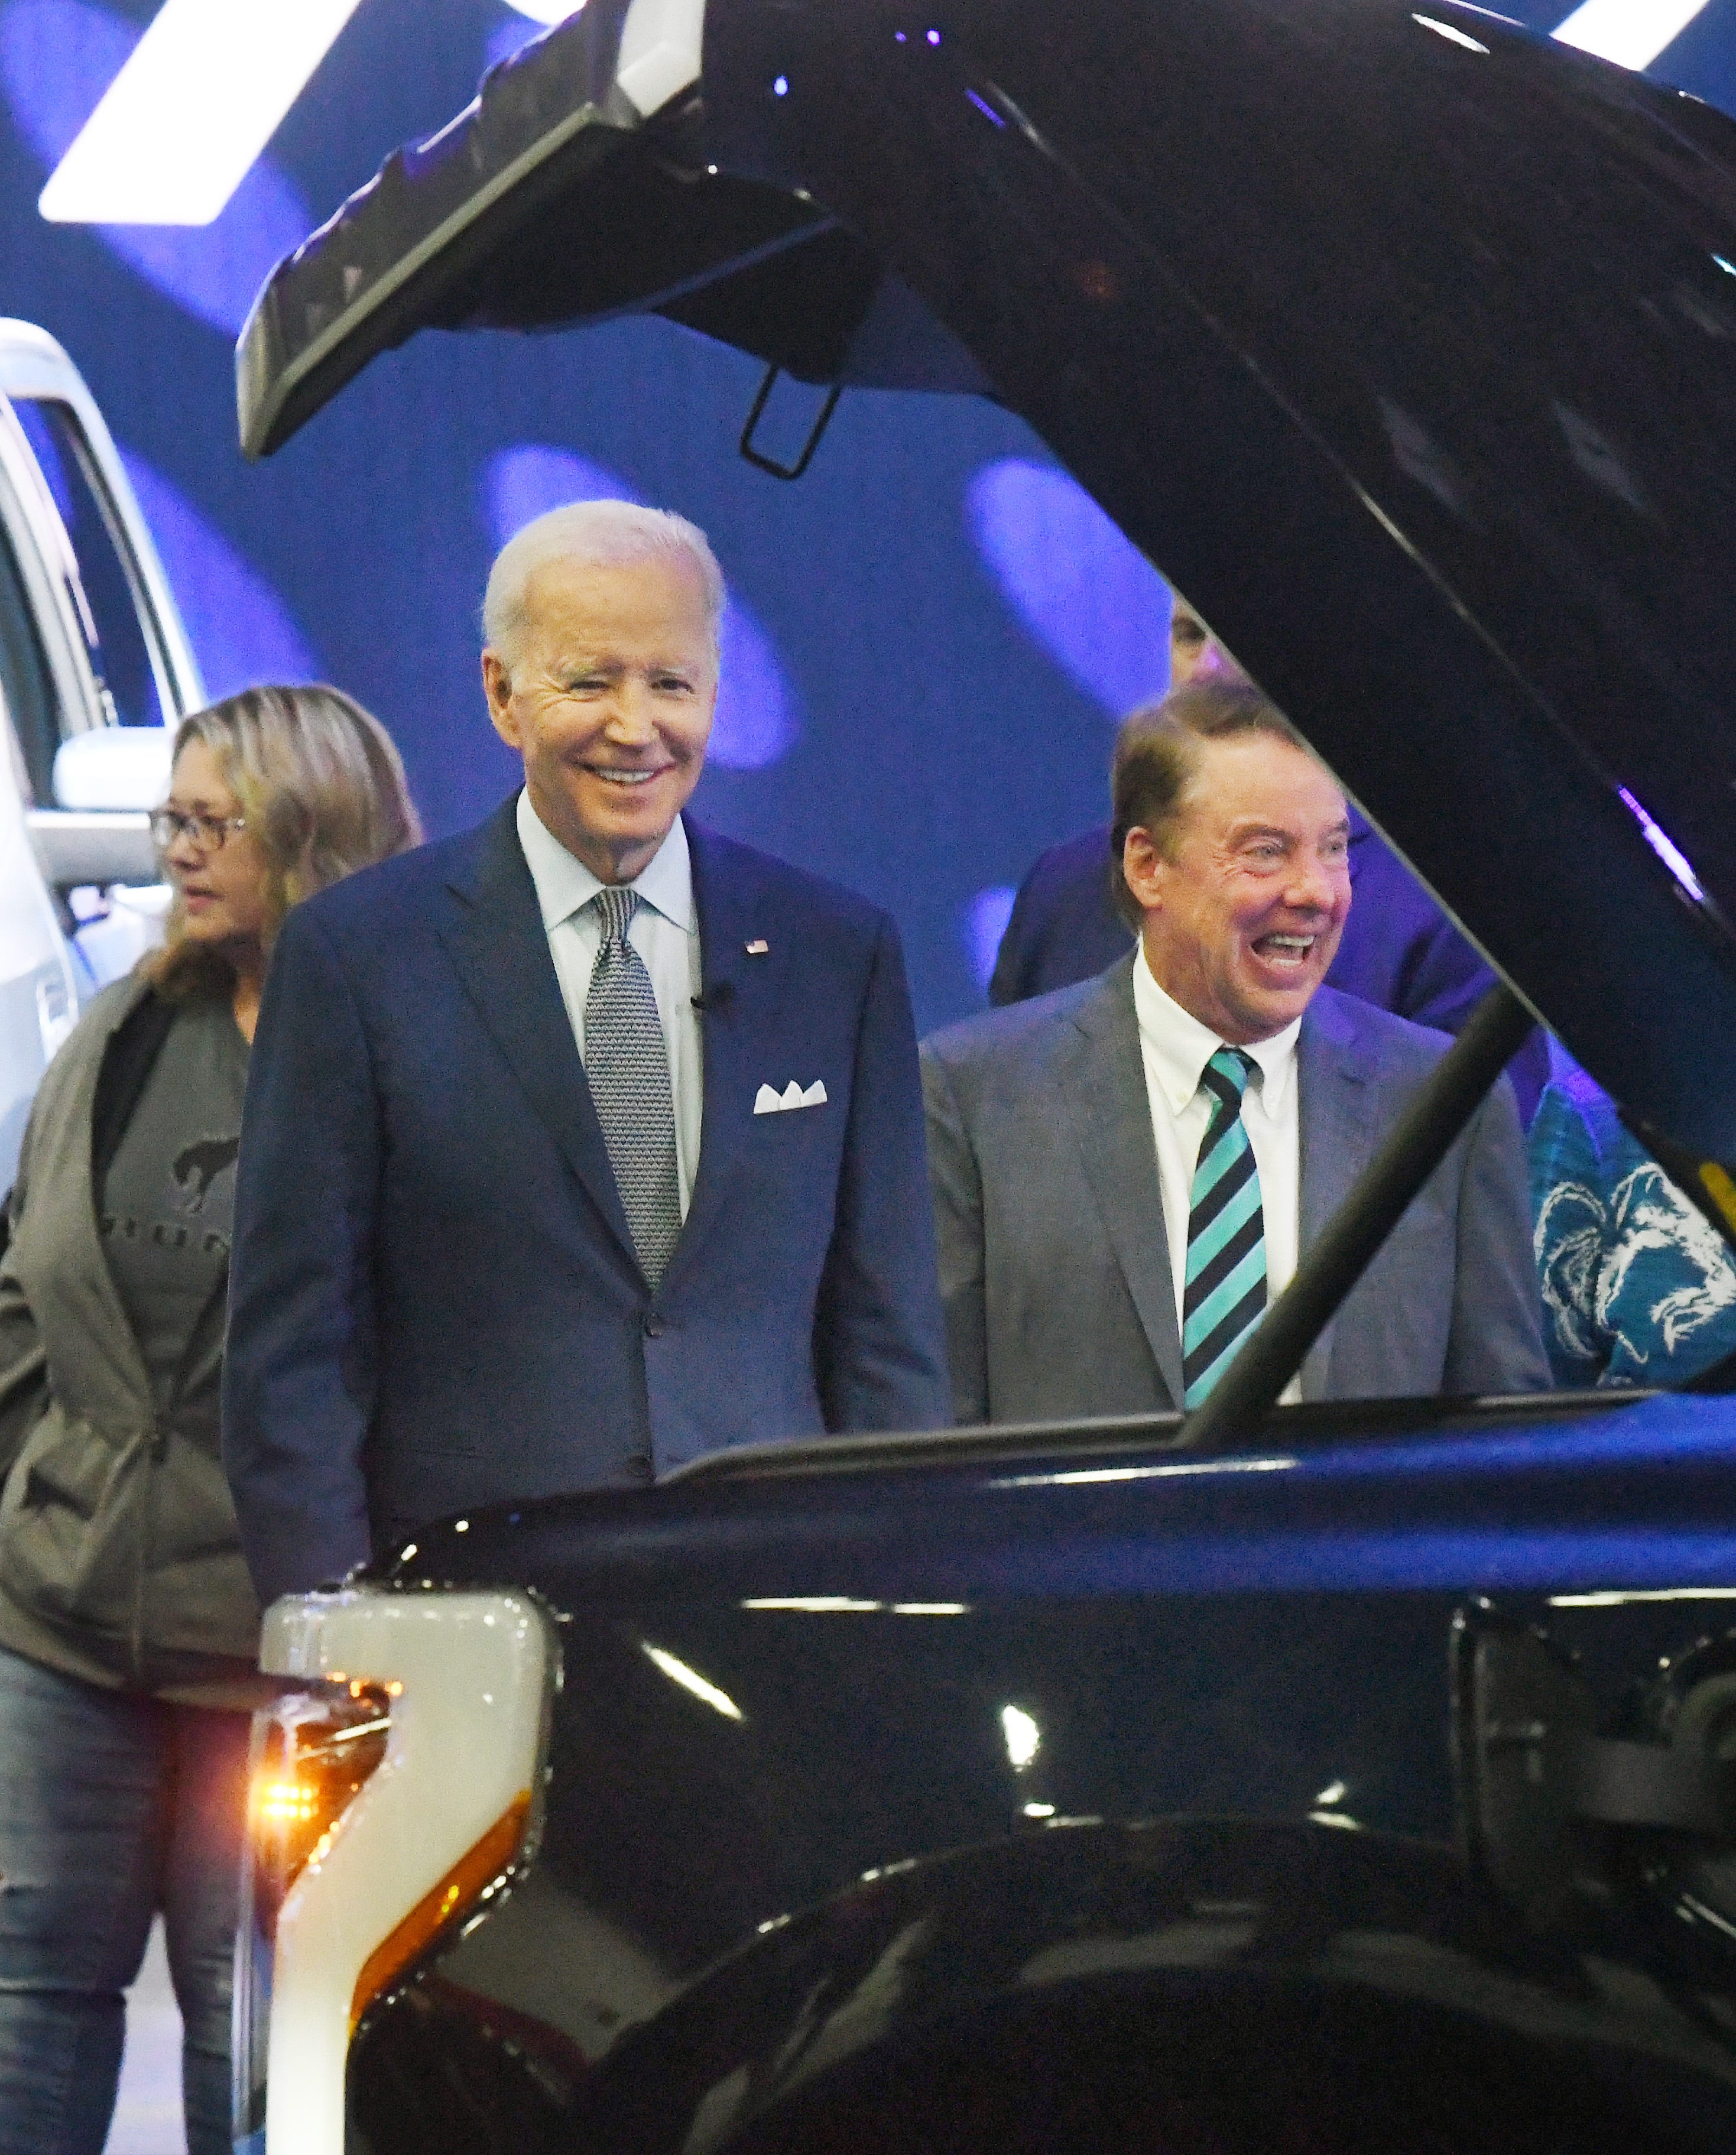 President Joe Biden and Executive Chair of Ford Motor Company William Clay Ford Jr. walk the Ford display during a tour of the 2022 North American International Auto Show in Detroit, Michigan on September 14, 2022.